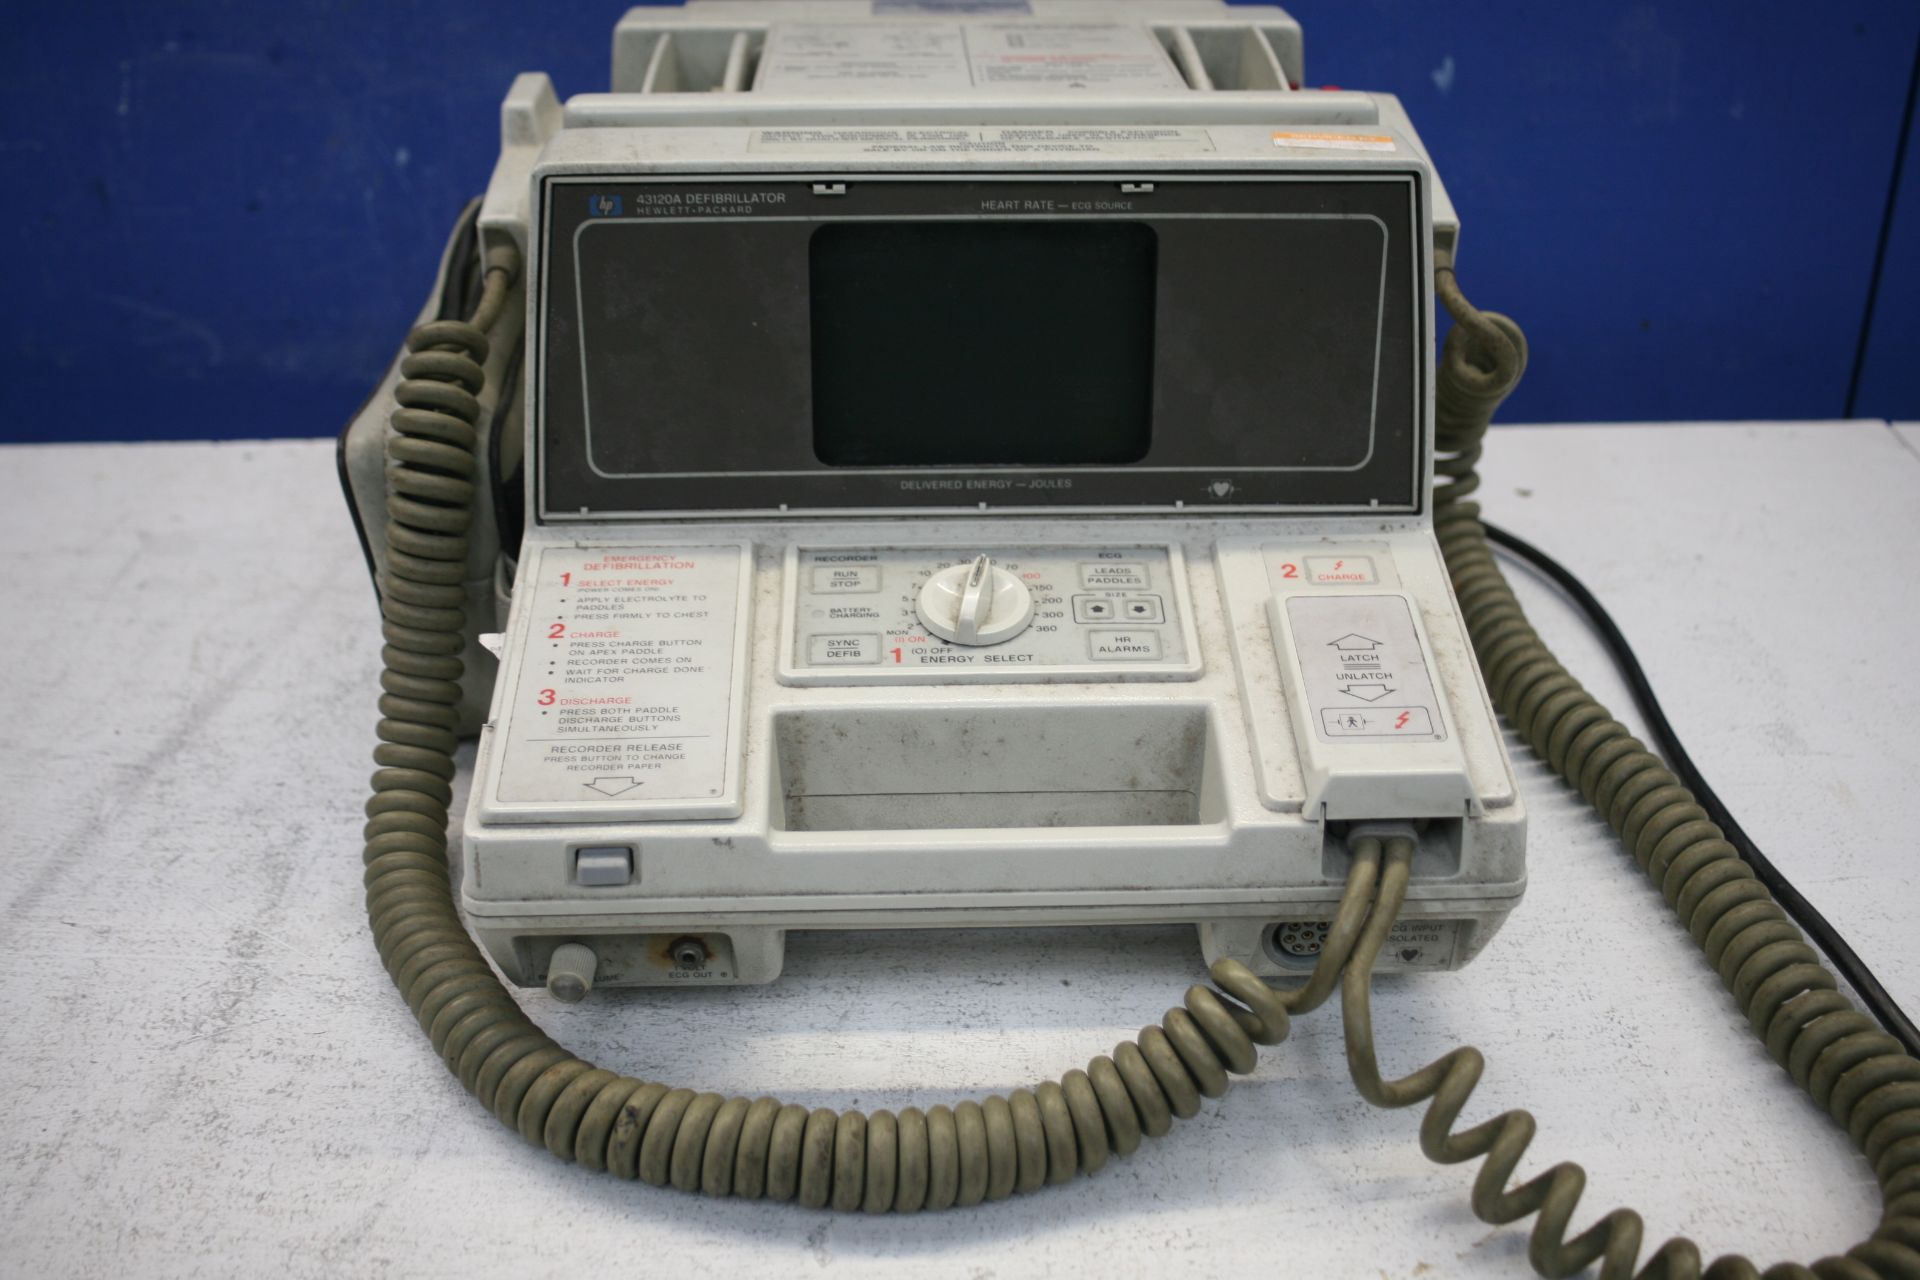 Hewlett Packard 43120A Defibrillator with Paddles *No Power* - Image 2 of 2